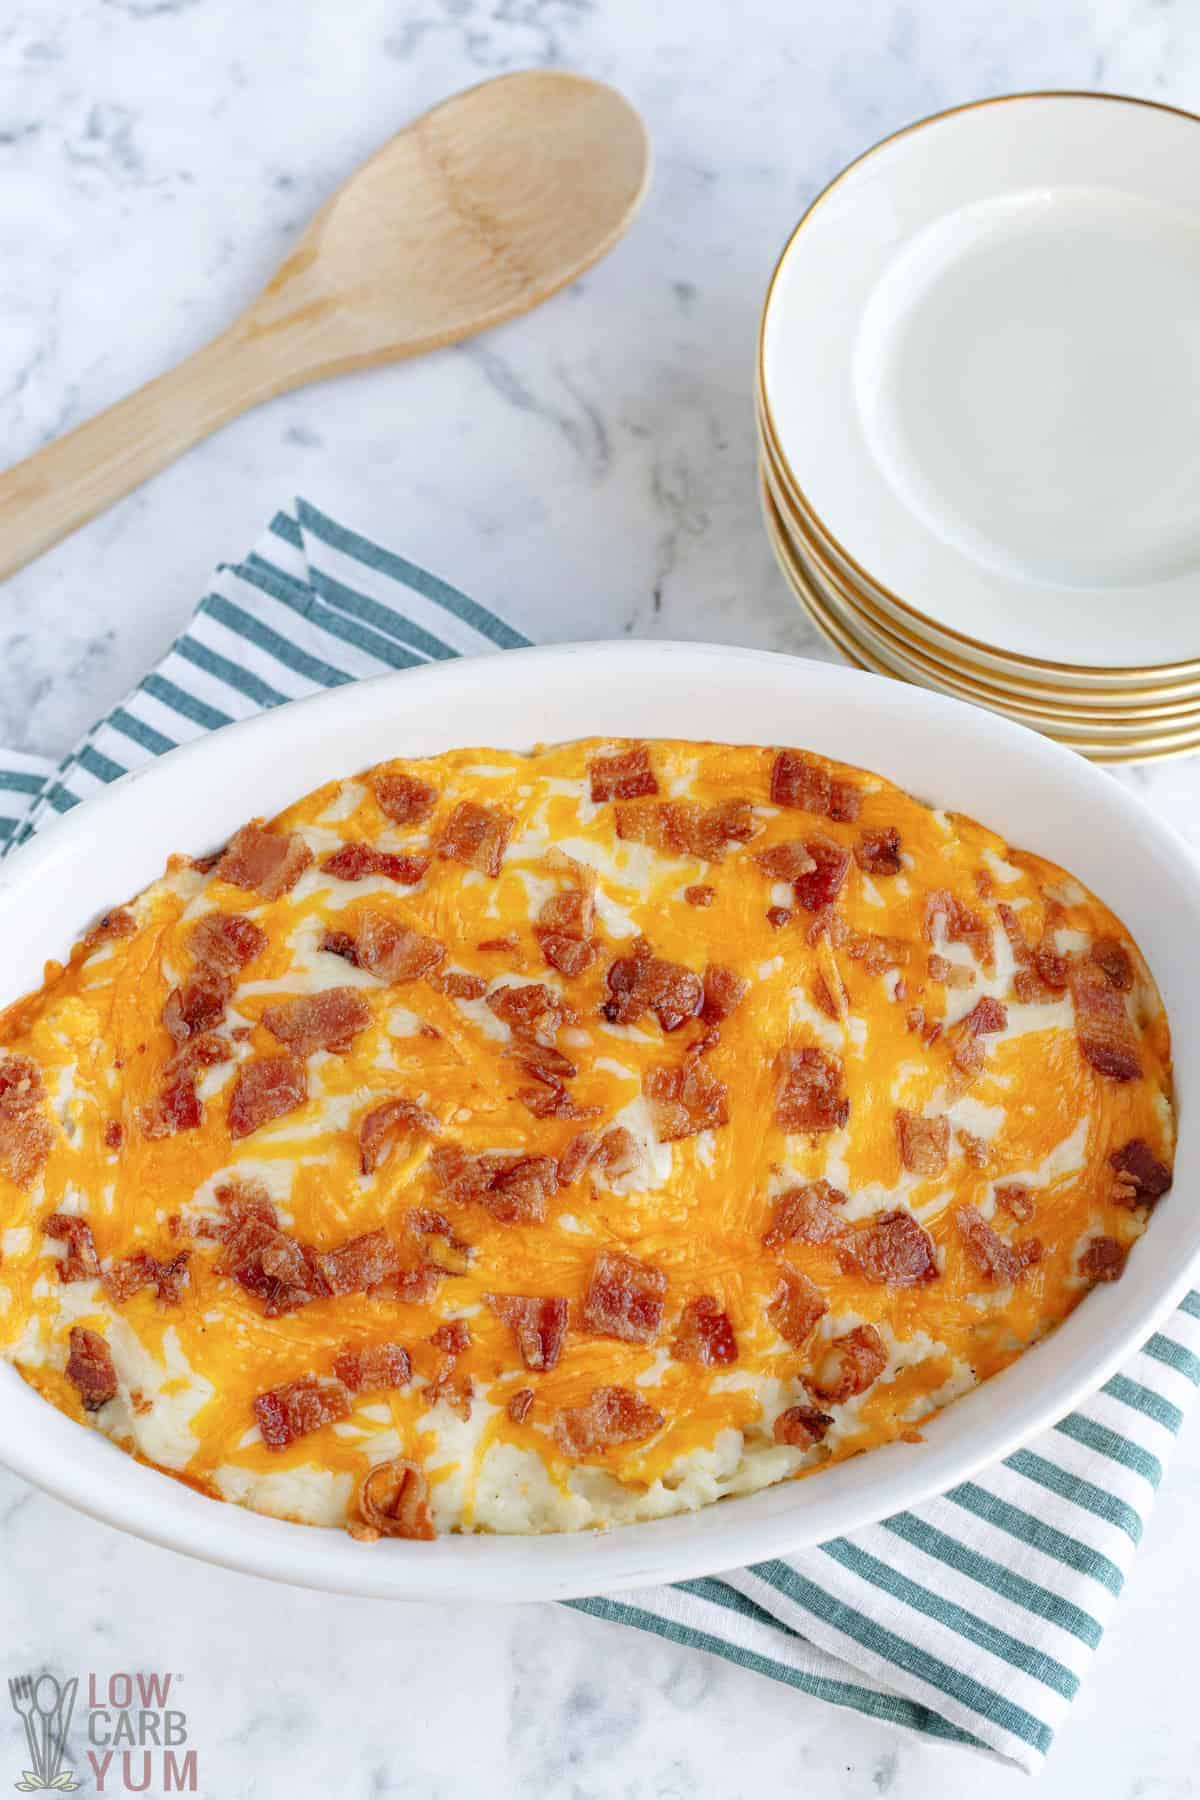 baked loaded cauliflower casserole in baking dish with wooden spoon and plates.